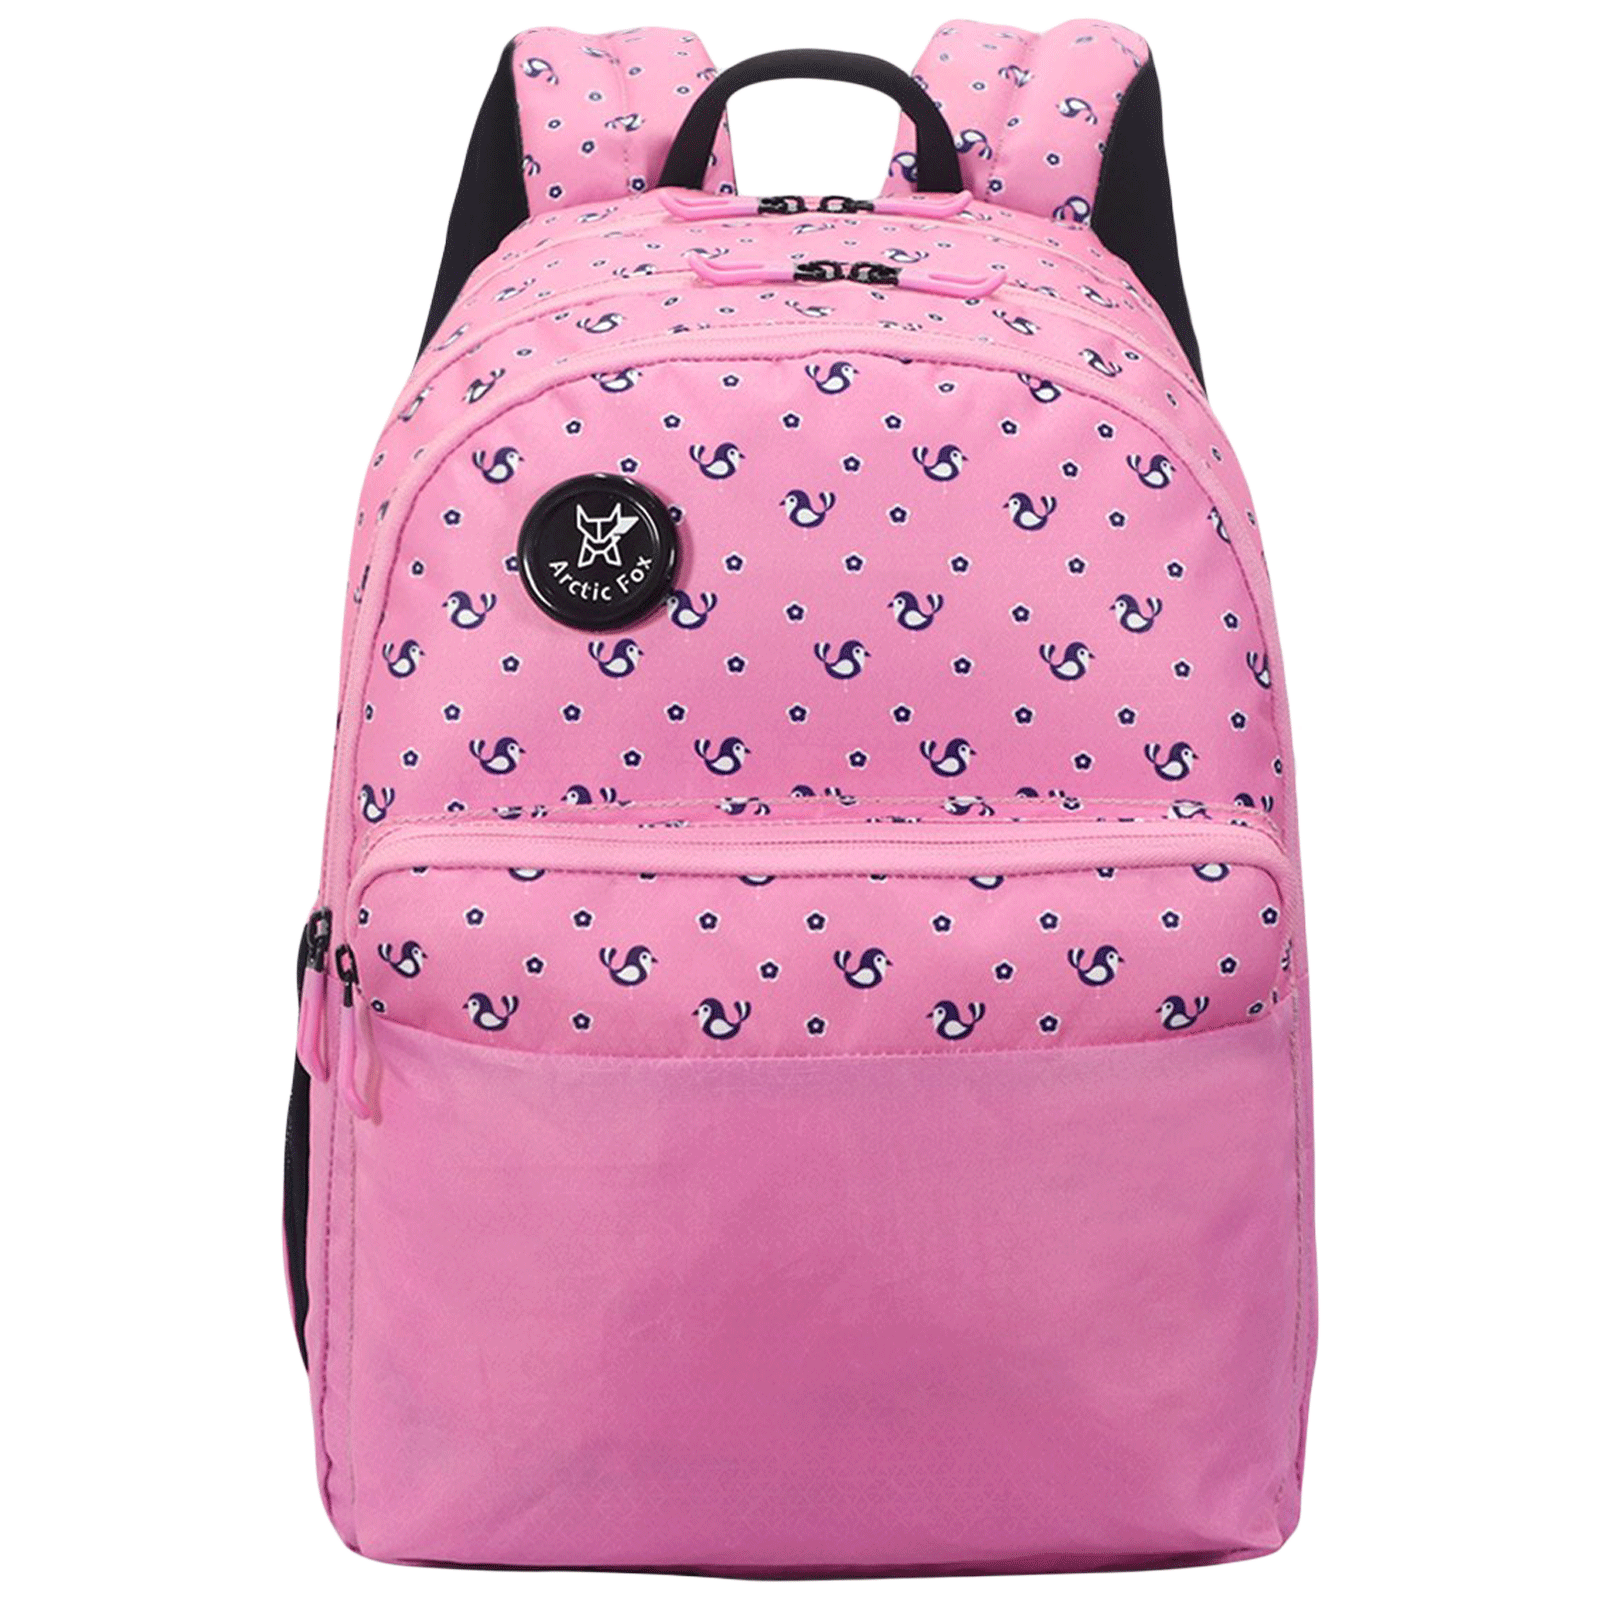 Arctic Fox Spring 23 Litres PU Coated Polyester Backpack (3 Spacious Compartments, FJUBPKFUPWZ066023, Fuchsia Pink)_1